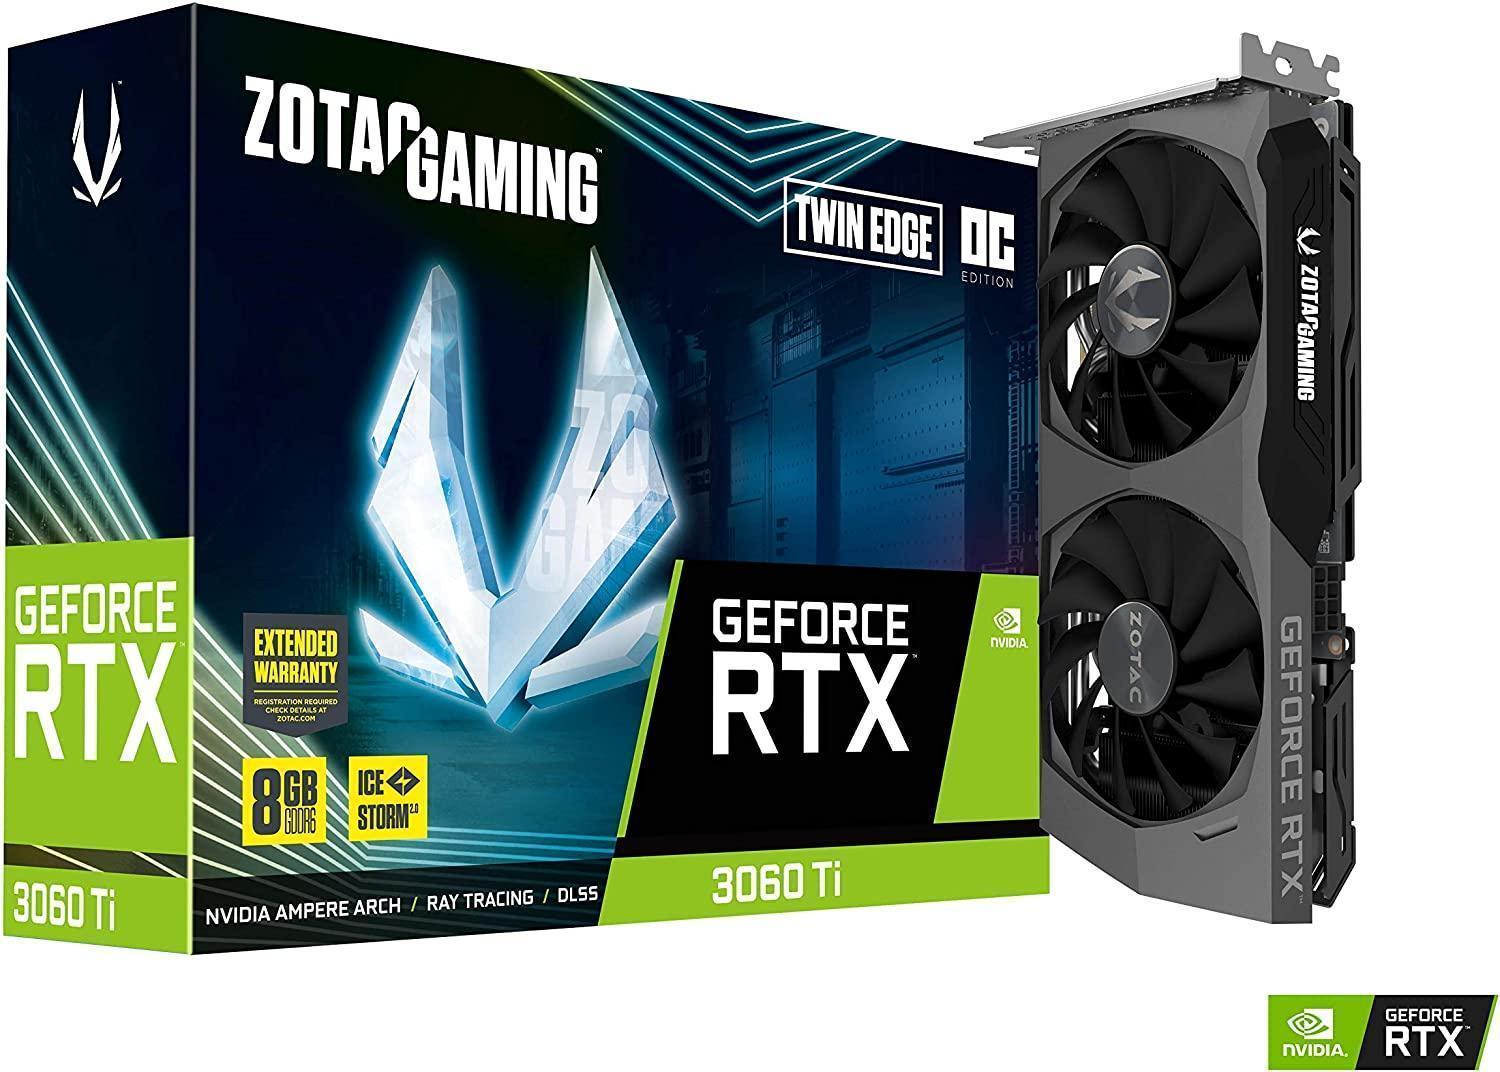 ZOTAC Gaming GeForce RTX™ 3060 Ti Twin Edge OC LHR 8GB GDDR6 256-bit 14 Gbps PCIE 4.0 Gaming Graphics Card, IceStorm 2.0 Advanced Cooling, Active Fan Control, Freeze Fan Stop ZT-A30610H-10MLHR